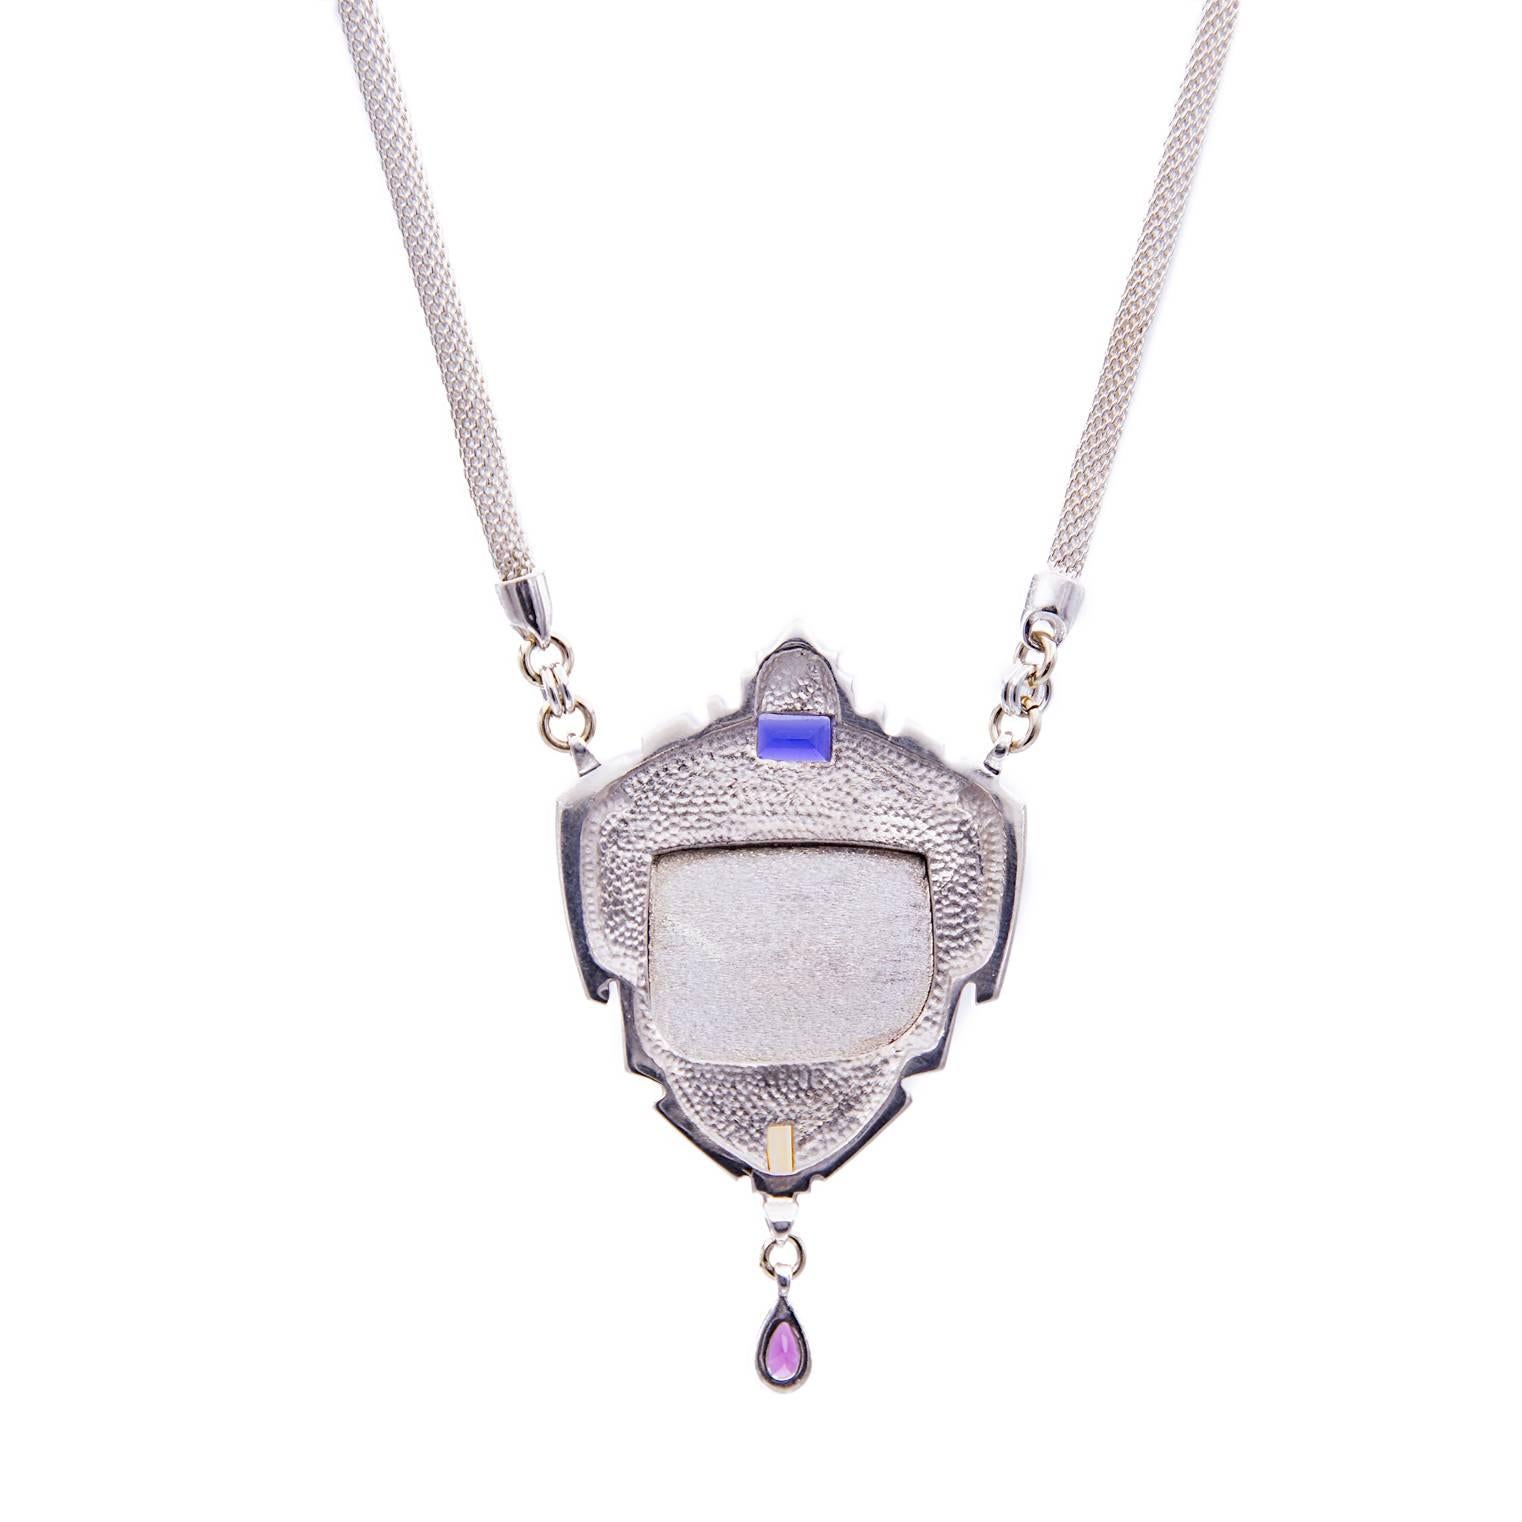 A brilliant artistic creation! The beautiful central jasper looks as if it's a scene from the southwest with spiraling skies and iron-rich plains. Set in a crown of sterling silver this piece is adorned with a deep blue iolite on top and a tear-drop